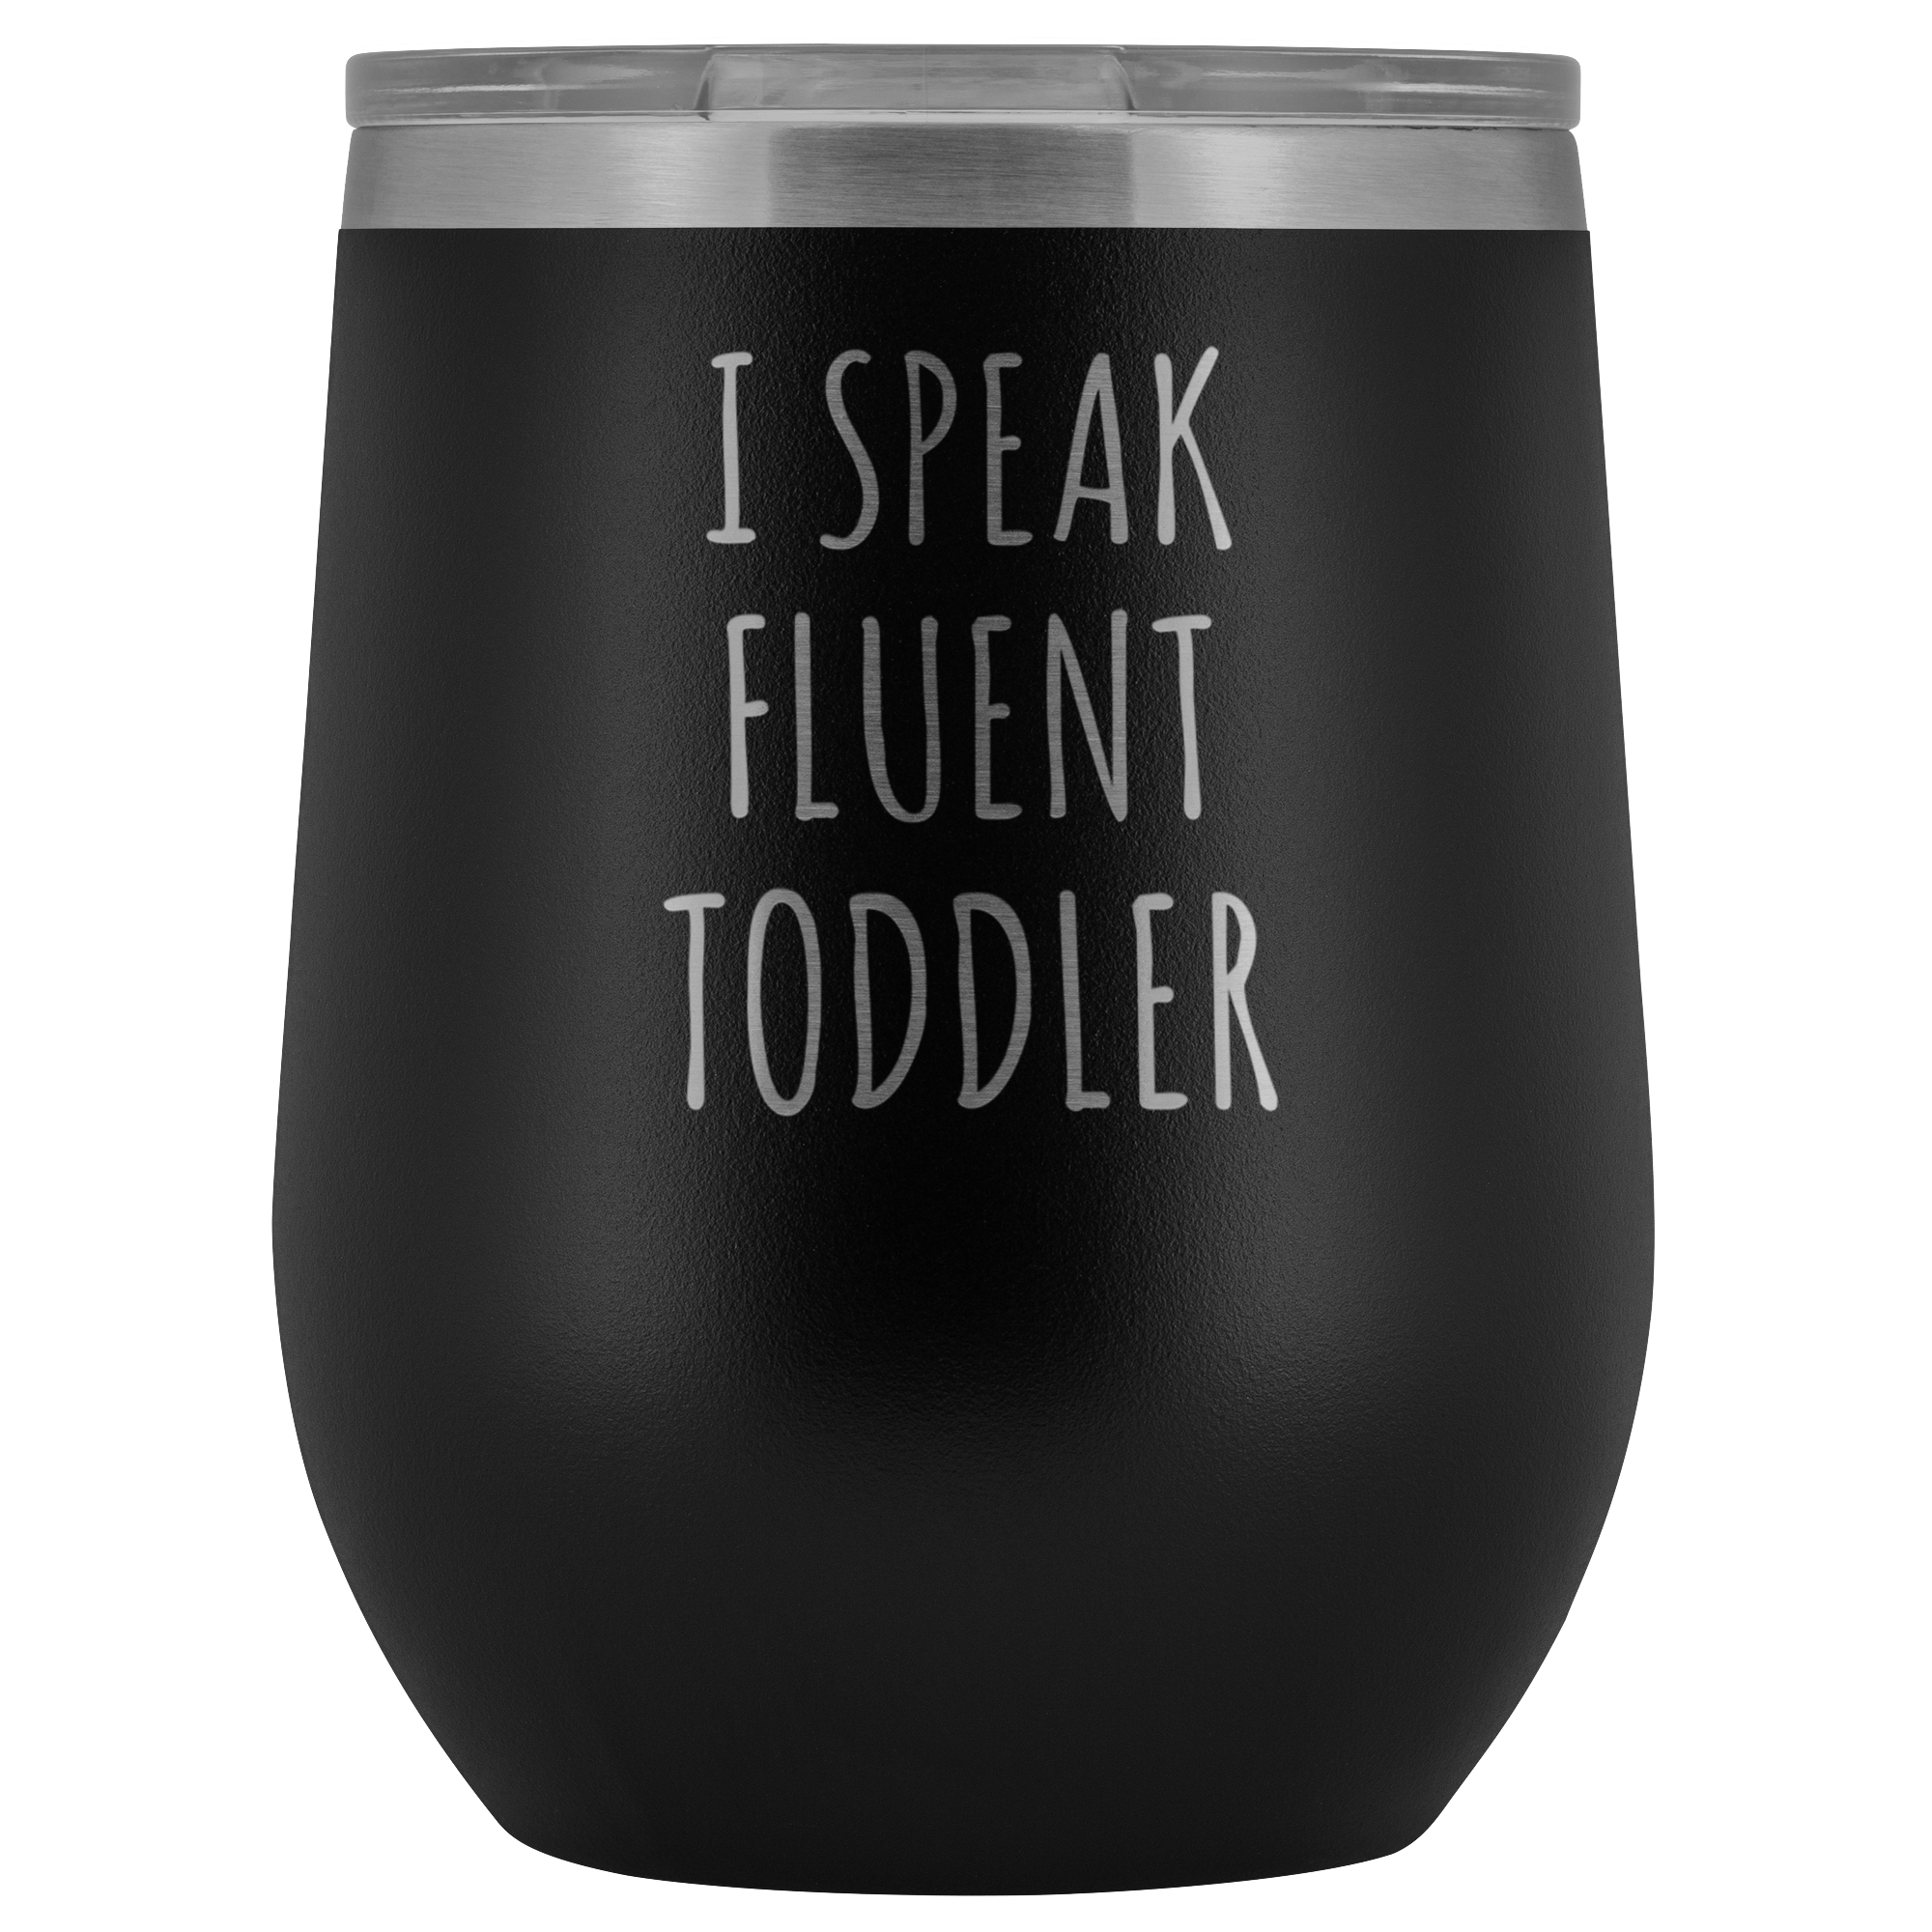 Daycare Provider Gift I Speak Fluent Toddler Daycare Teacher Preschool Gifts Funny Stemless Stainless Steel Insulated Wine Tumbler Cup BPA Free 12oz